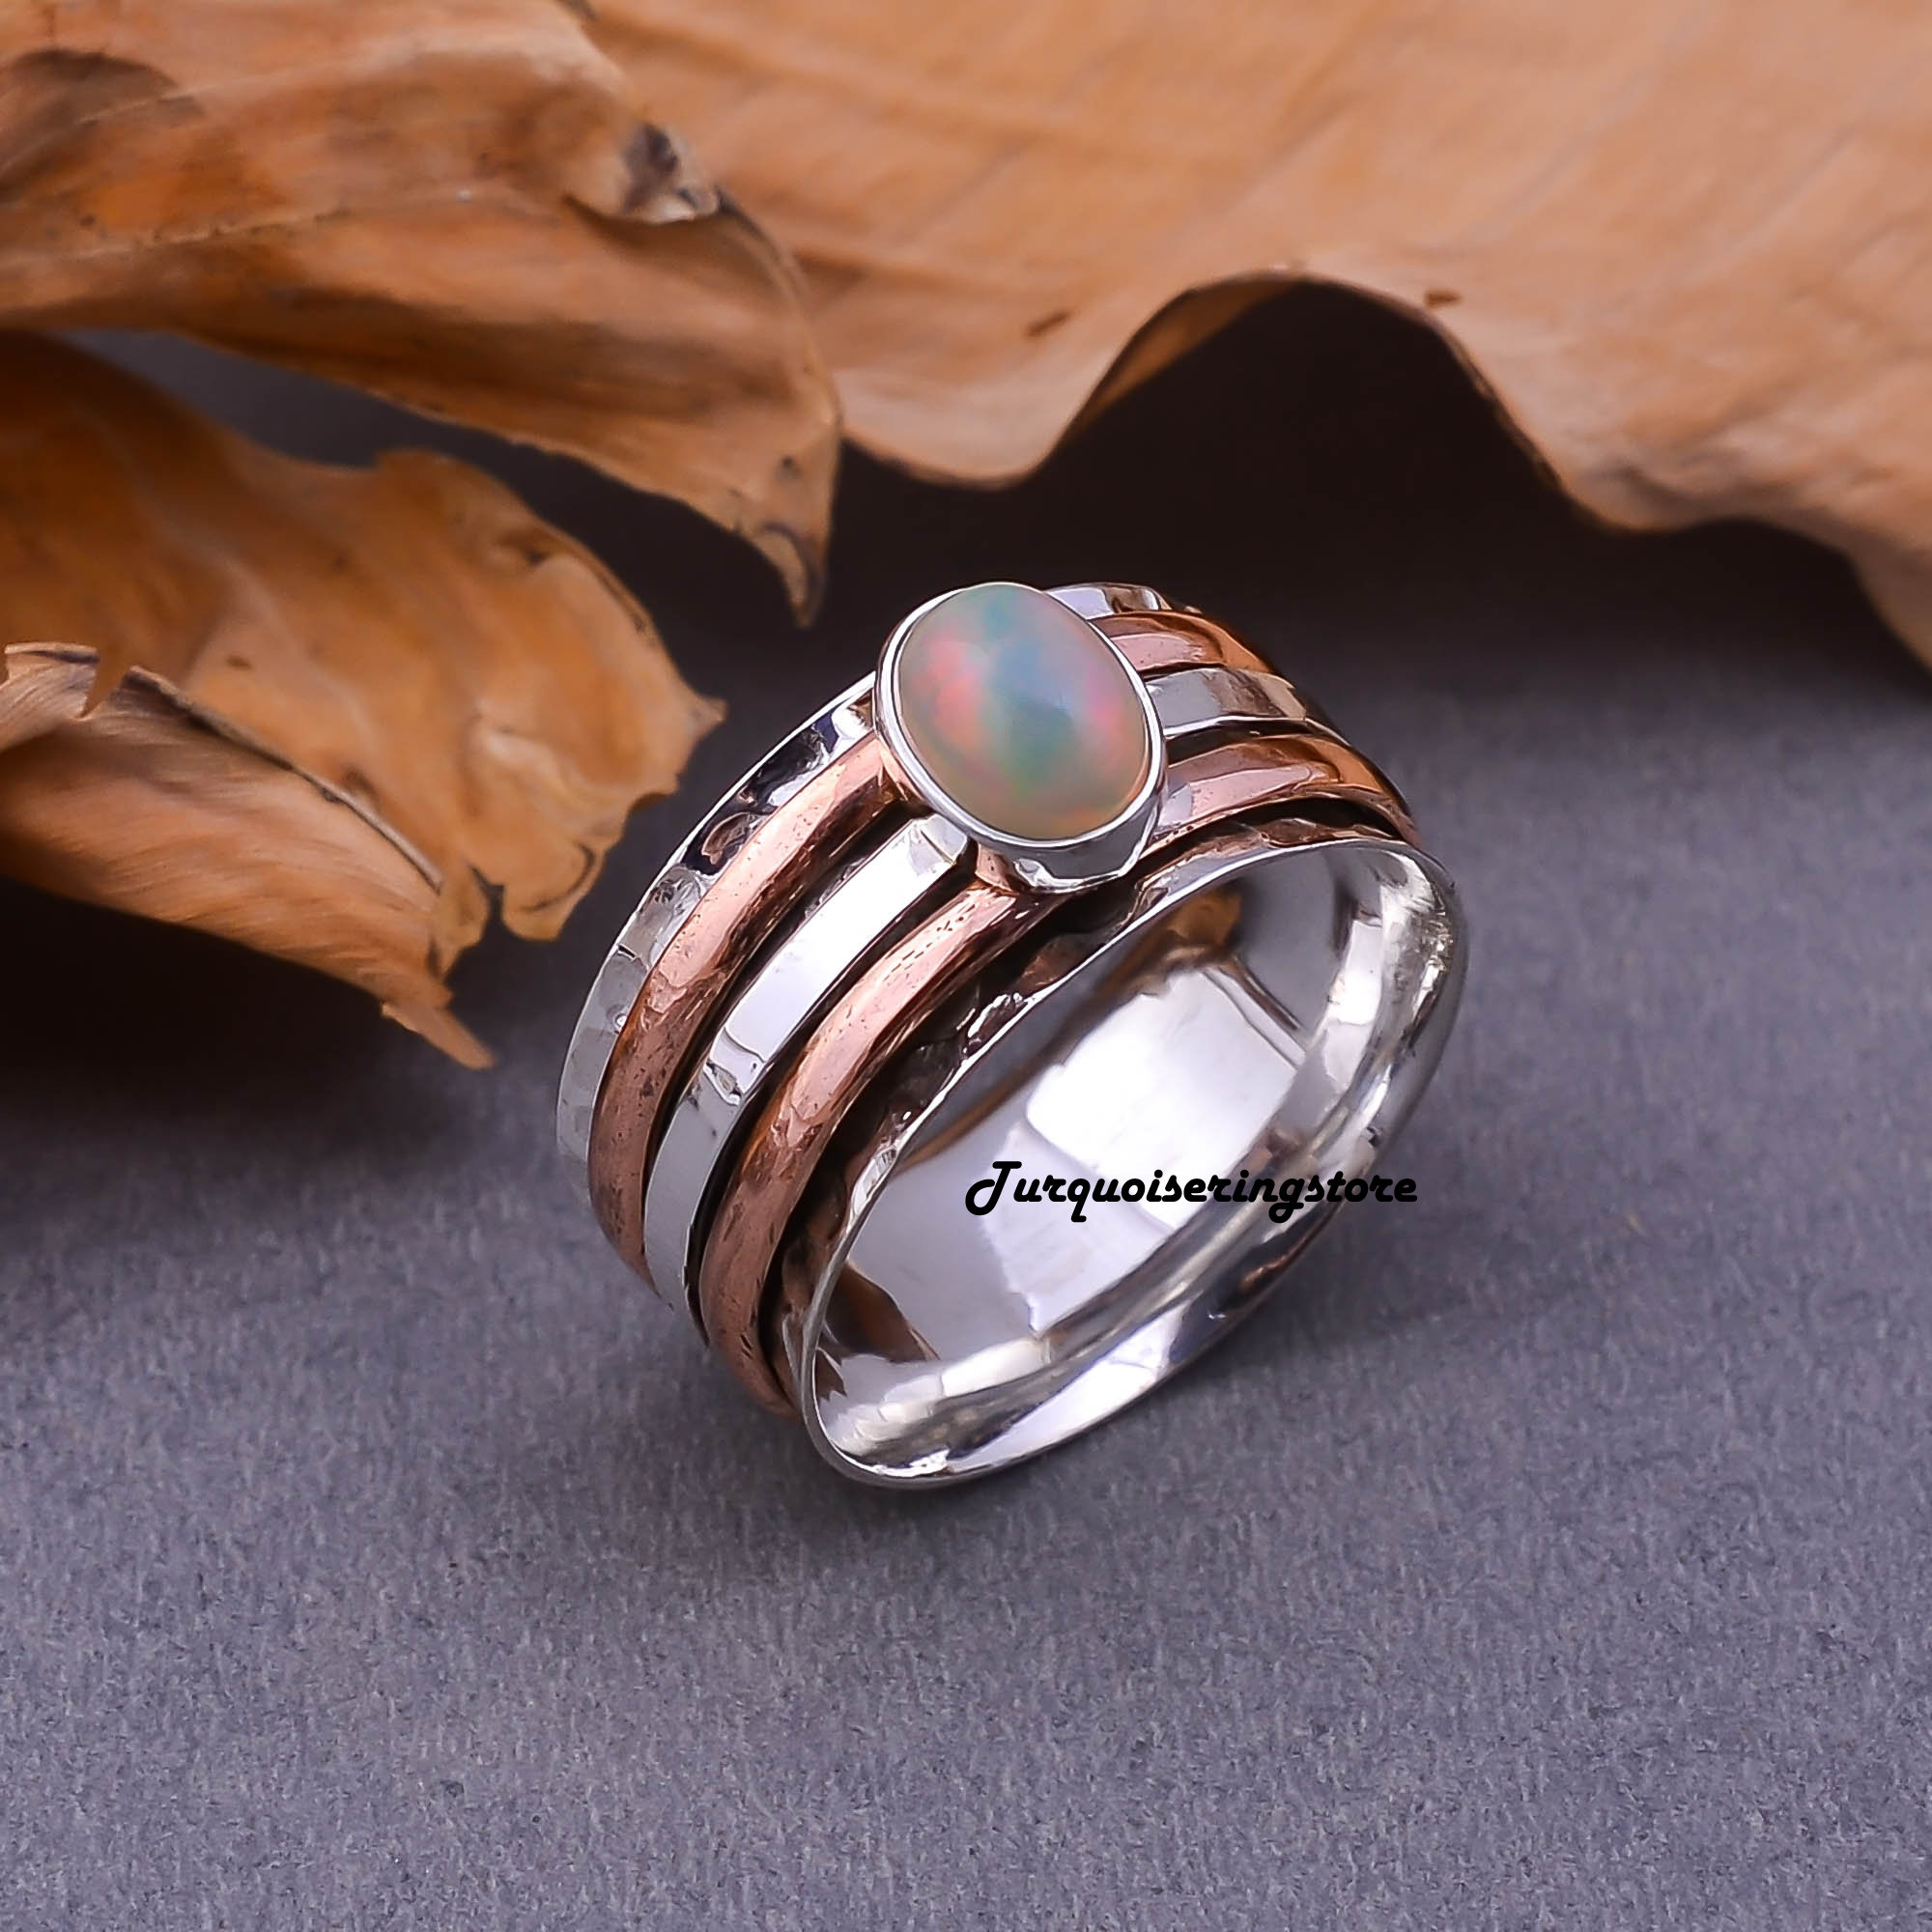 Birthday Gft Dainty Ring Handmade Ring Worry Ring Women Ring Love Ring Promise Ring 925 Silver Ring Beautiful Ring Opal Silver Ring